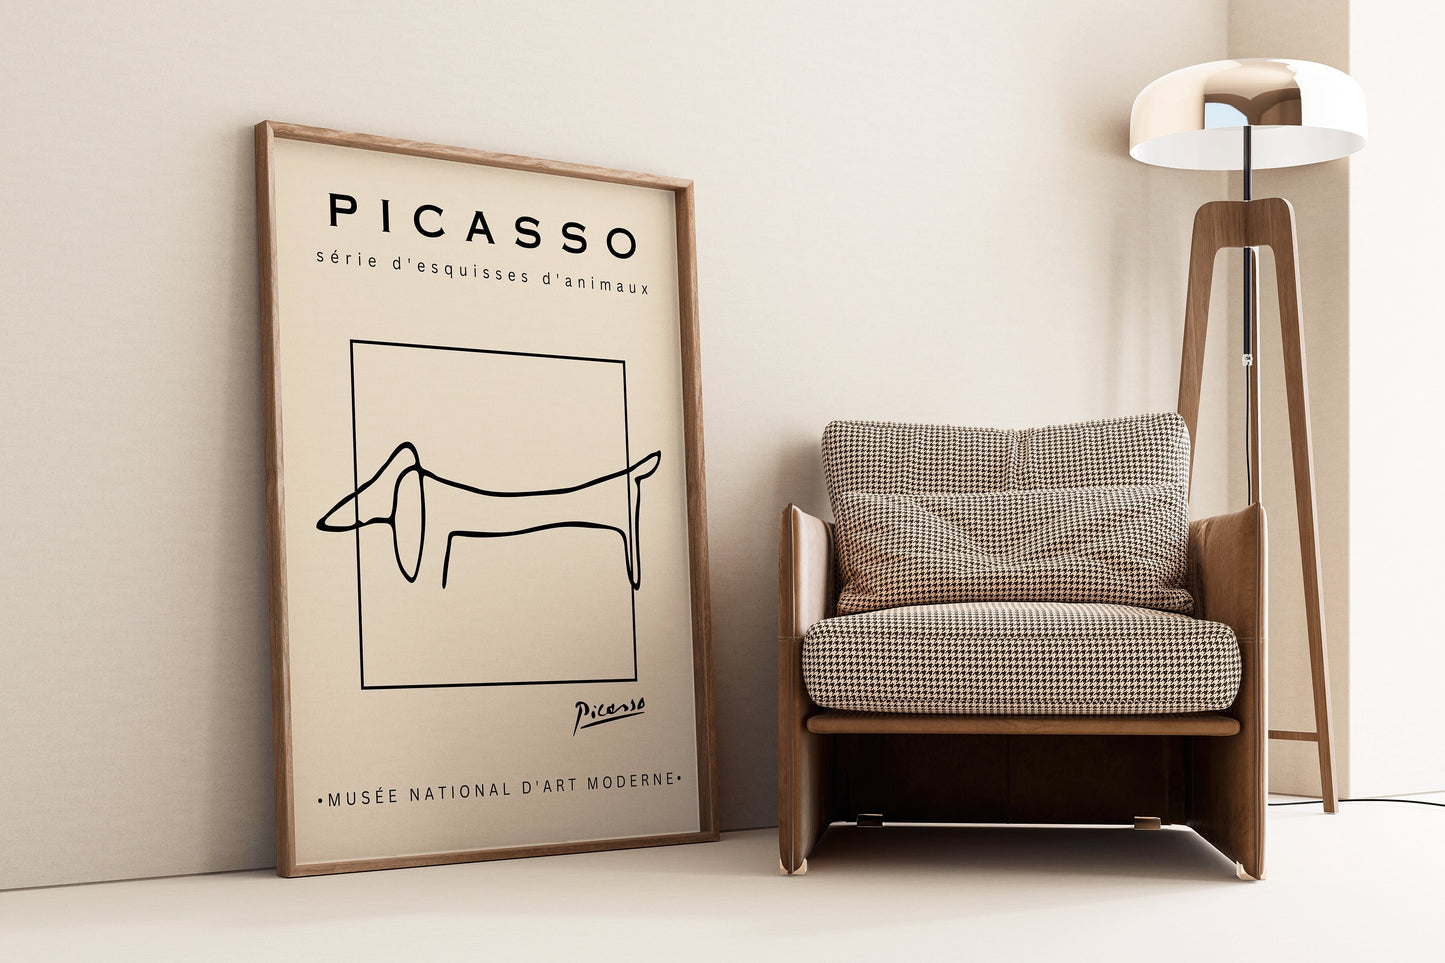 Pablo Picasso Dog Sketch Picasso Dachshund Minimalist Picasso Line Art Famous Art Line Art Above Sofa Art Framed Framed Ready to Hang